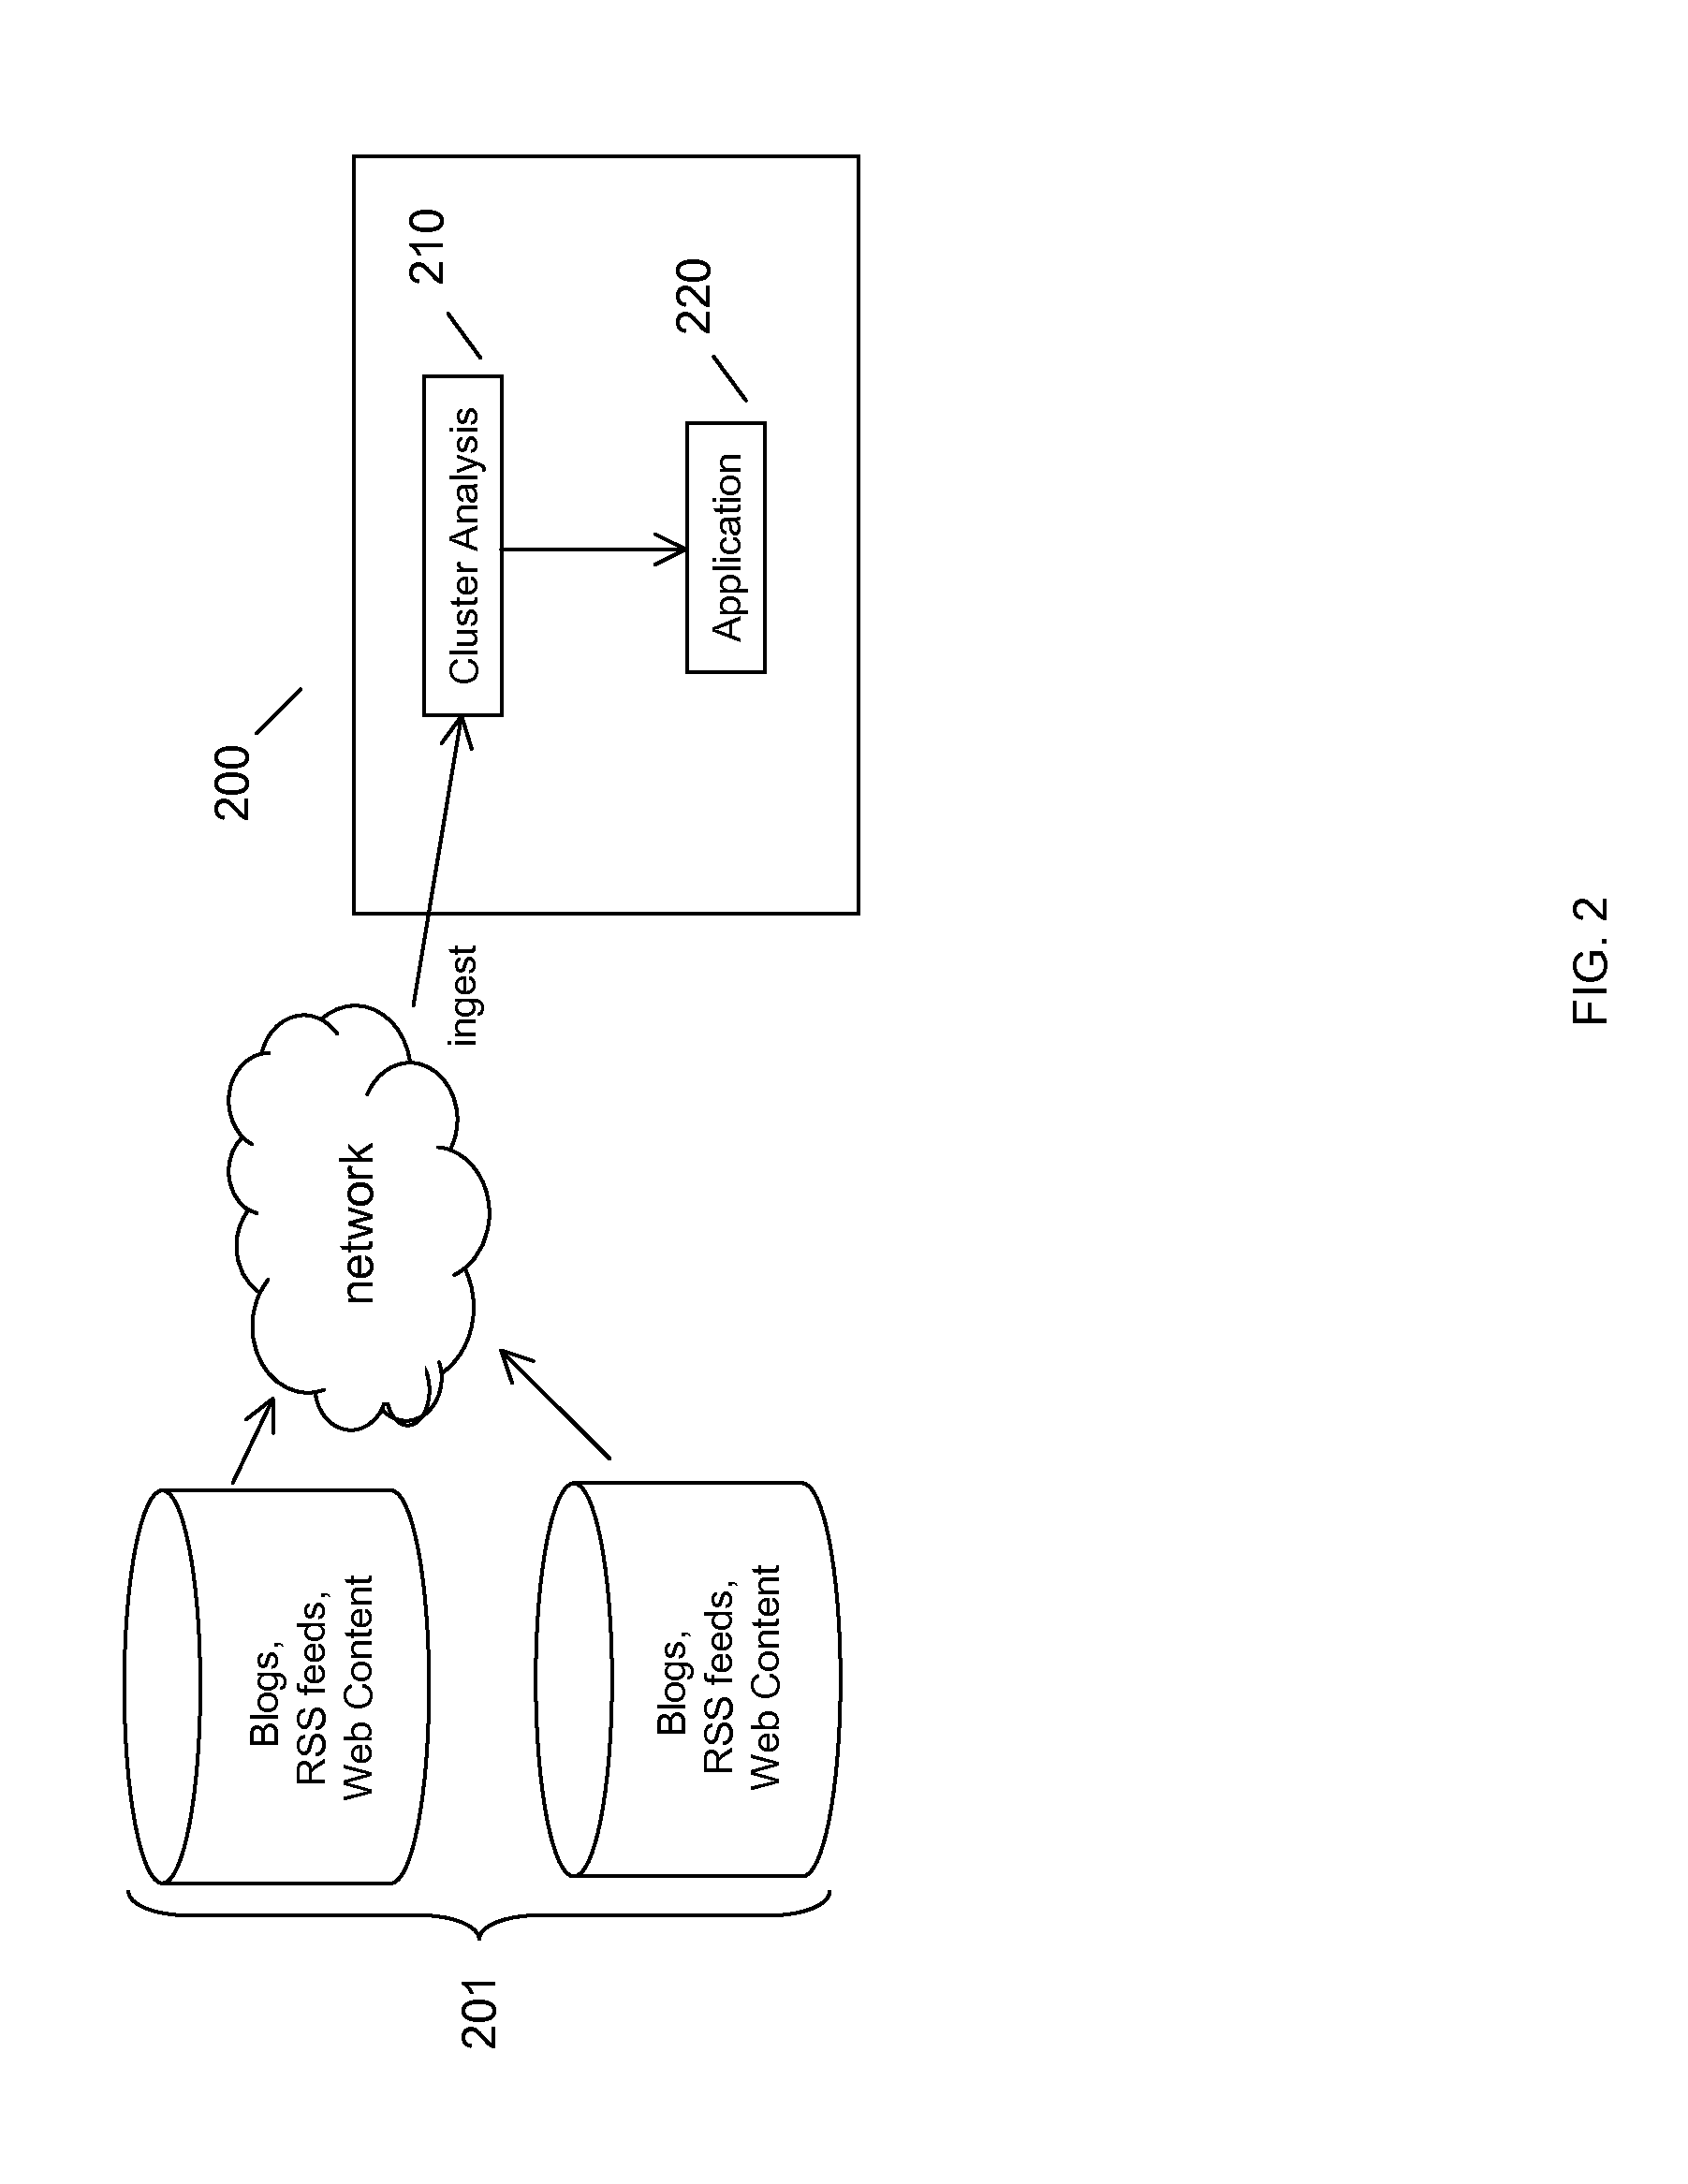 Systems and methods for cluster augmentation of search results